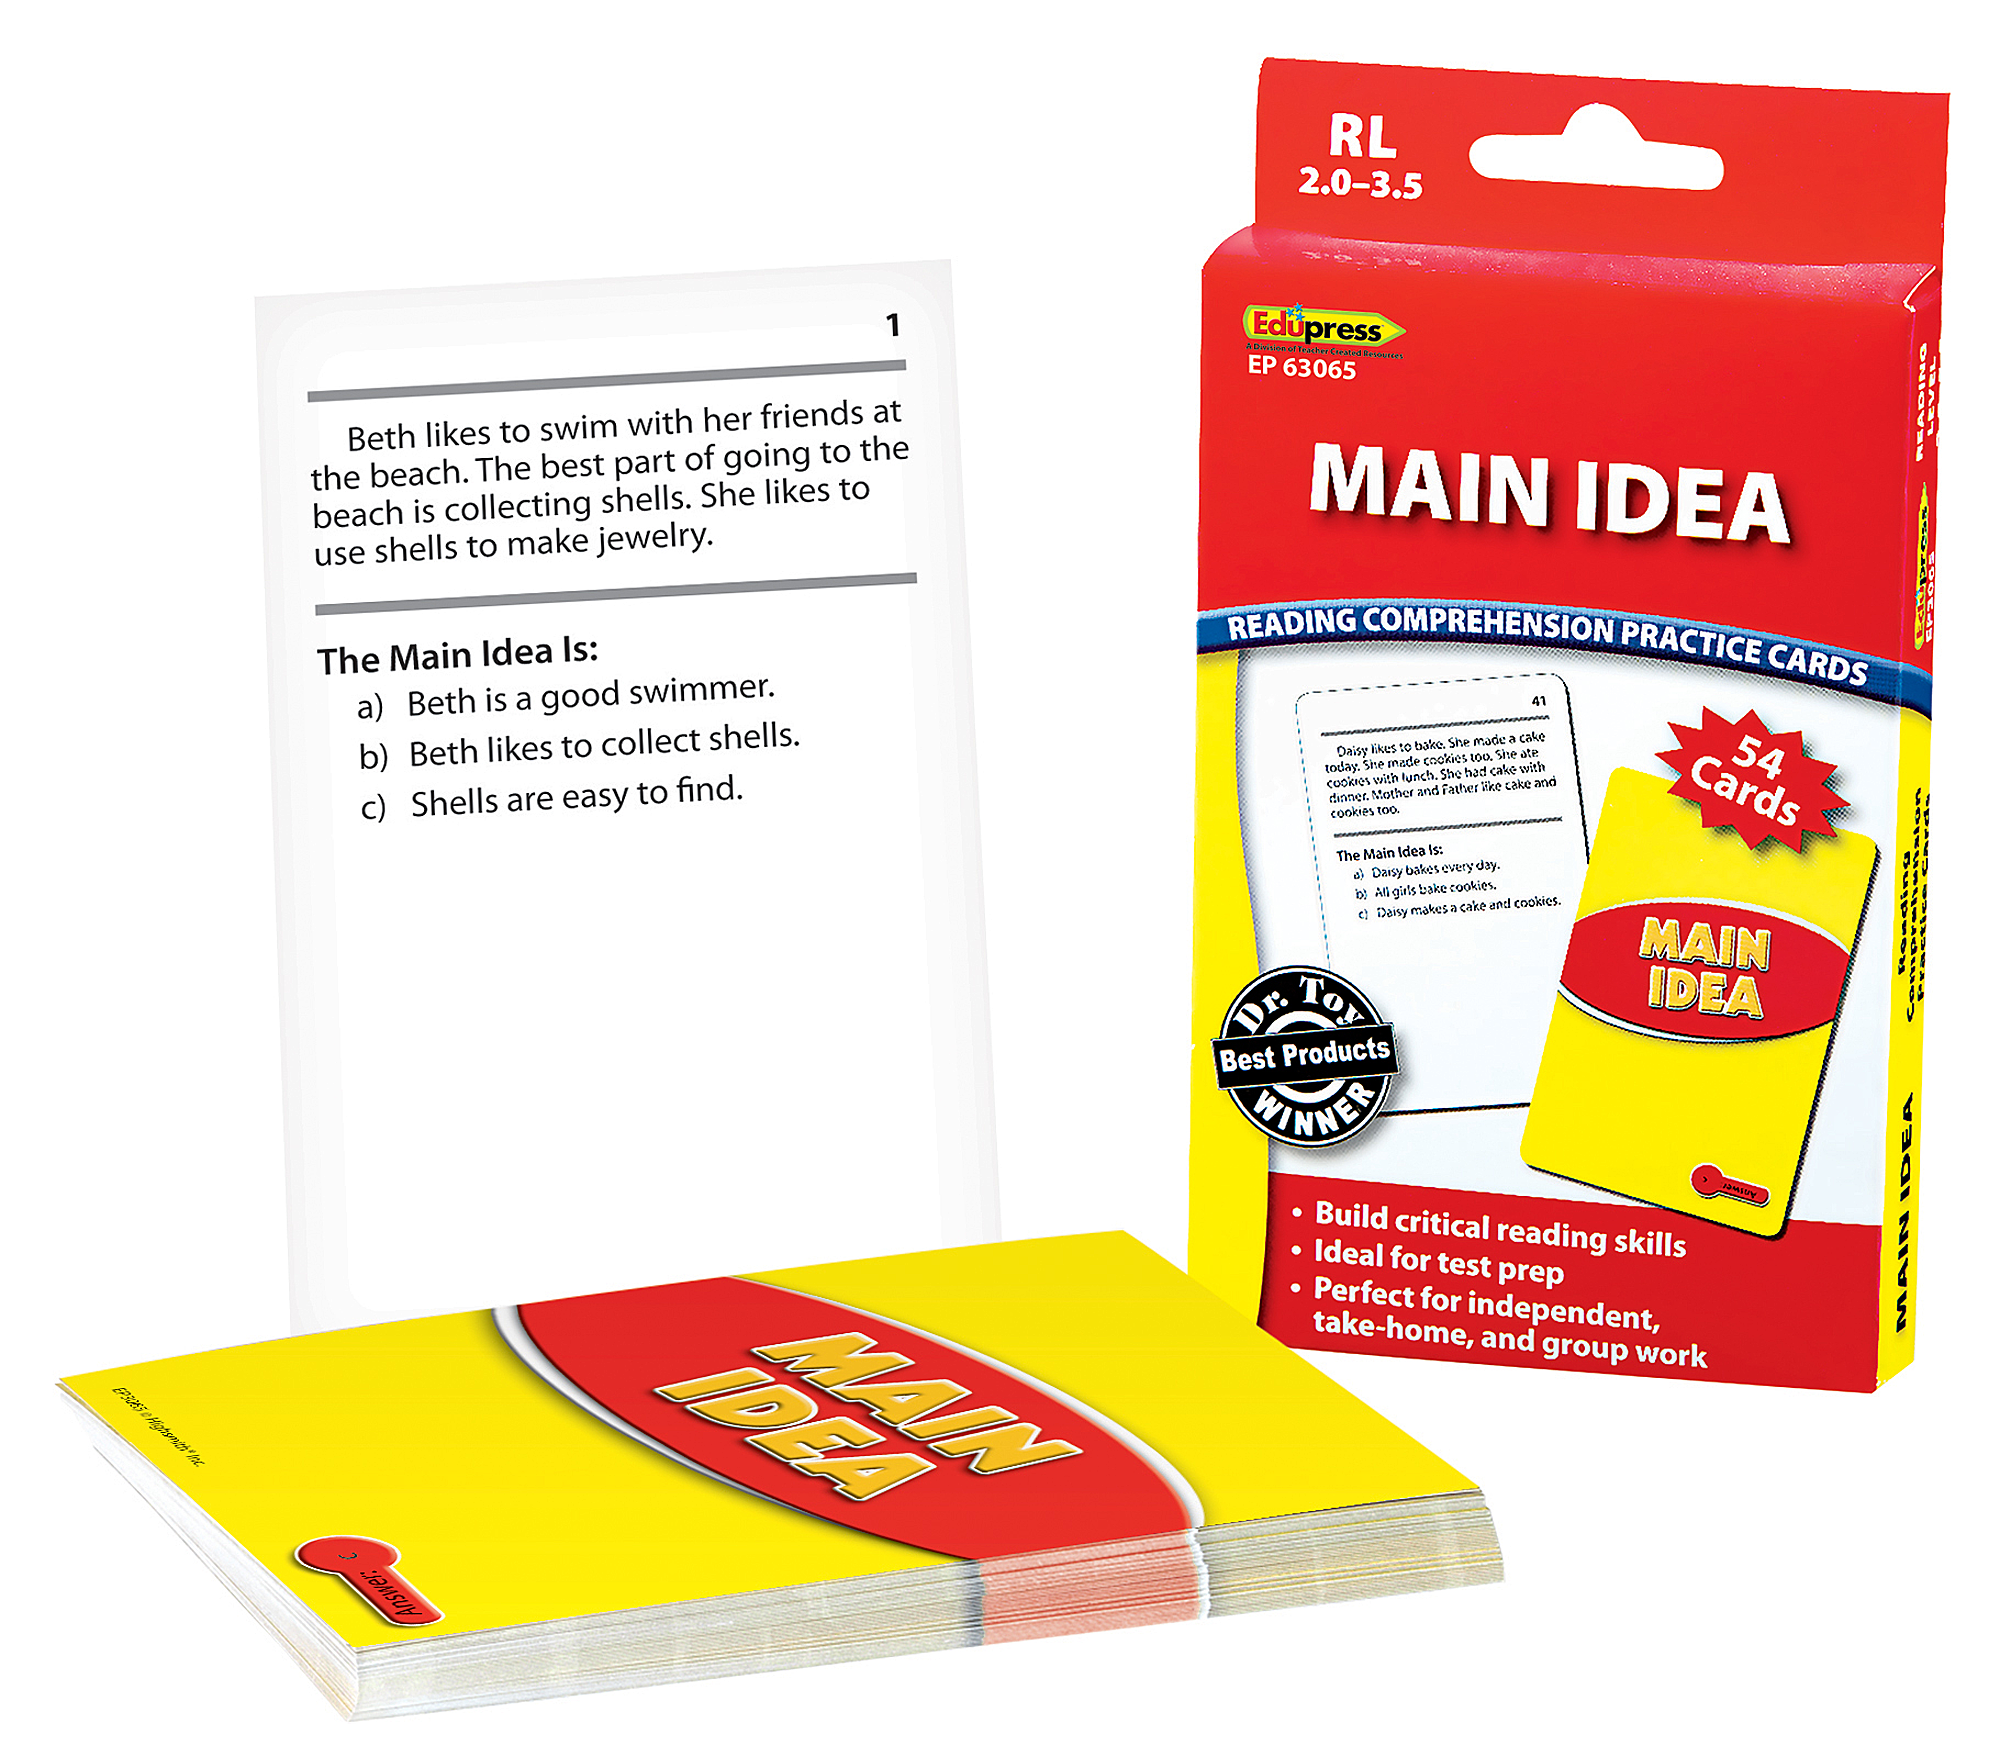 Reading Comprehension Practice Cards: Main Idea (Red Level)